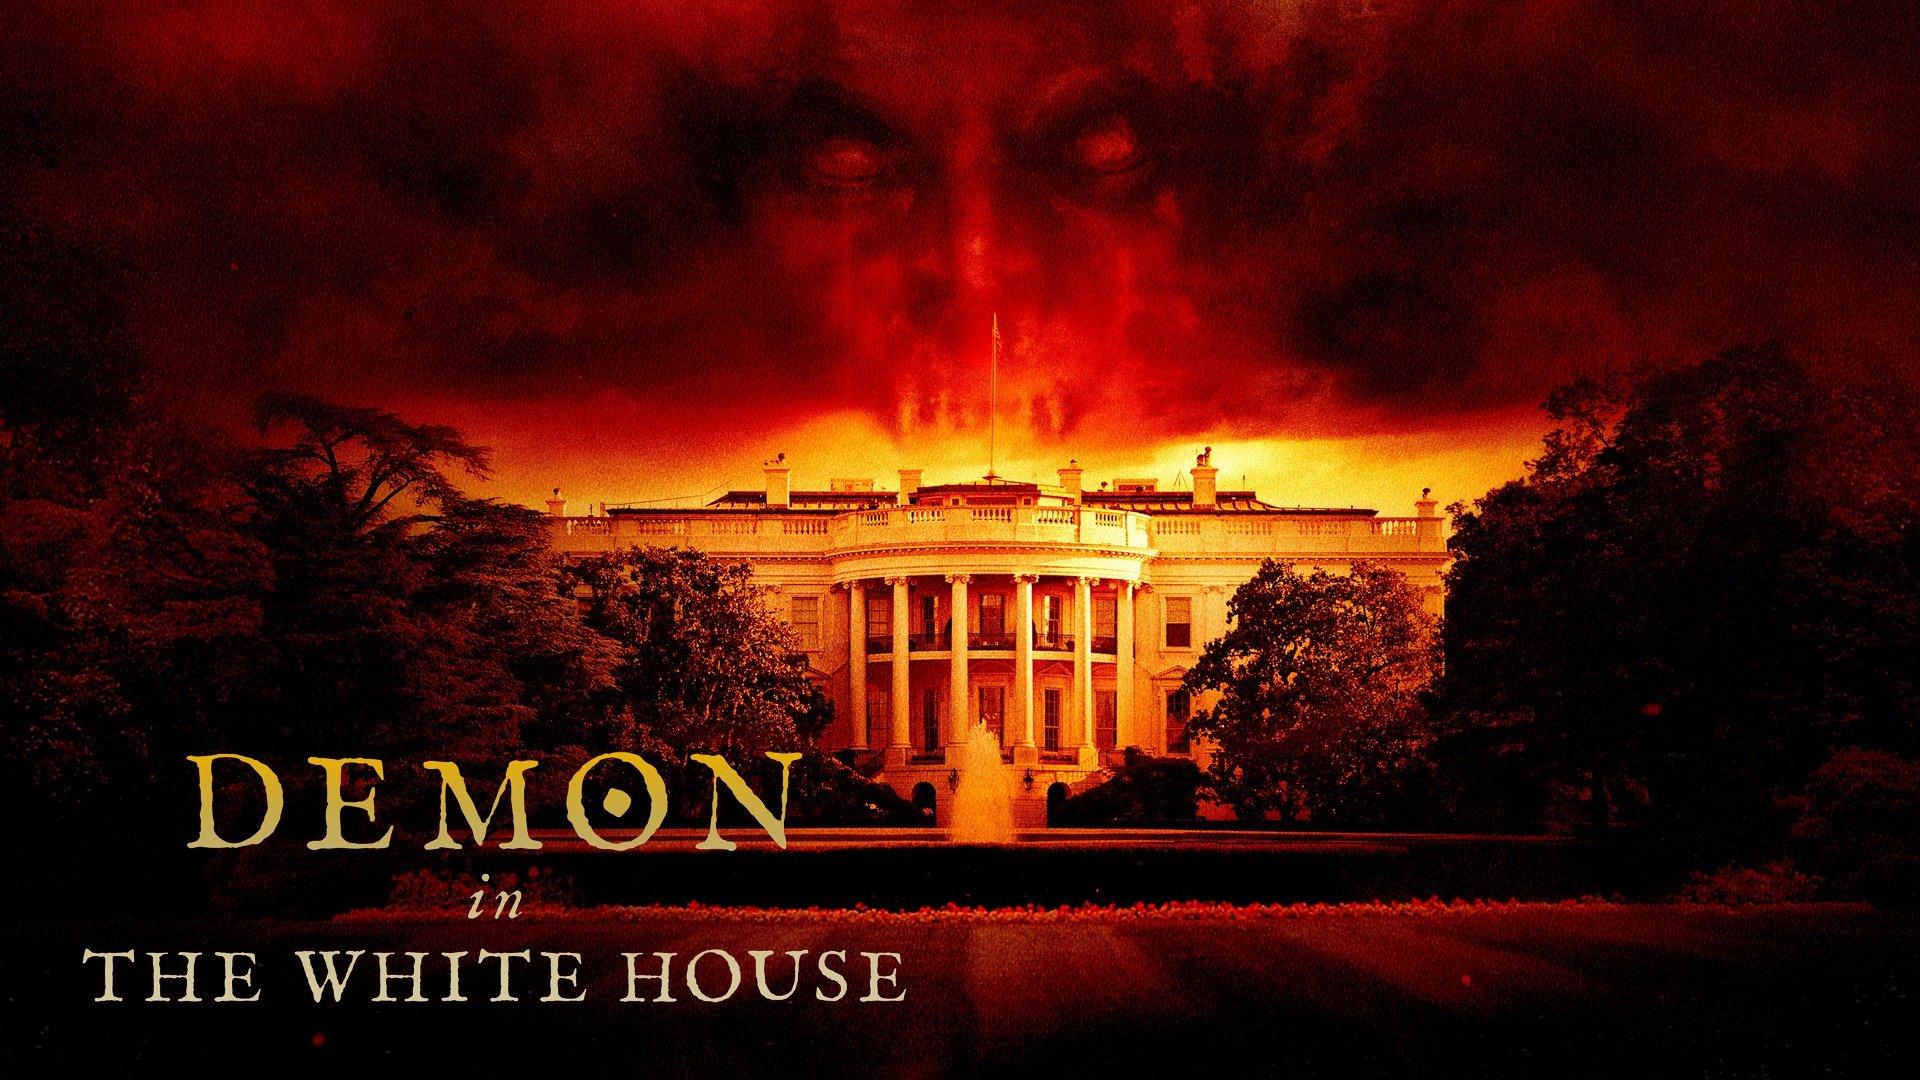 Watch Demon in the White House Streaming Online on Philo (Free Trial)